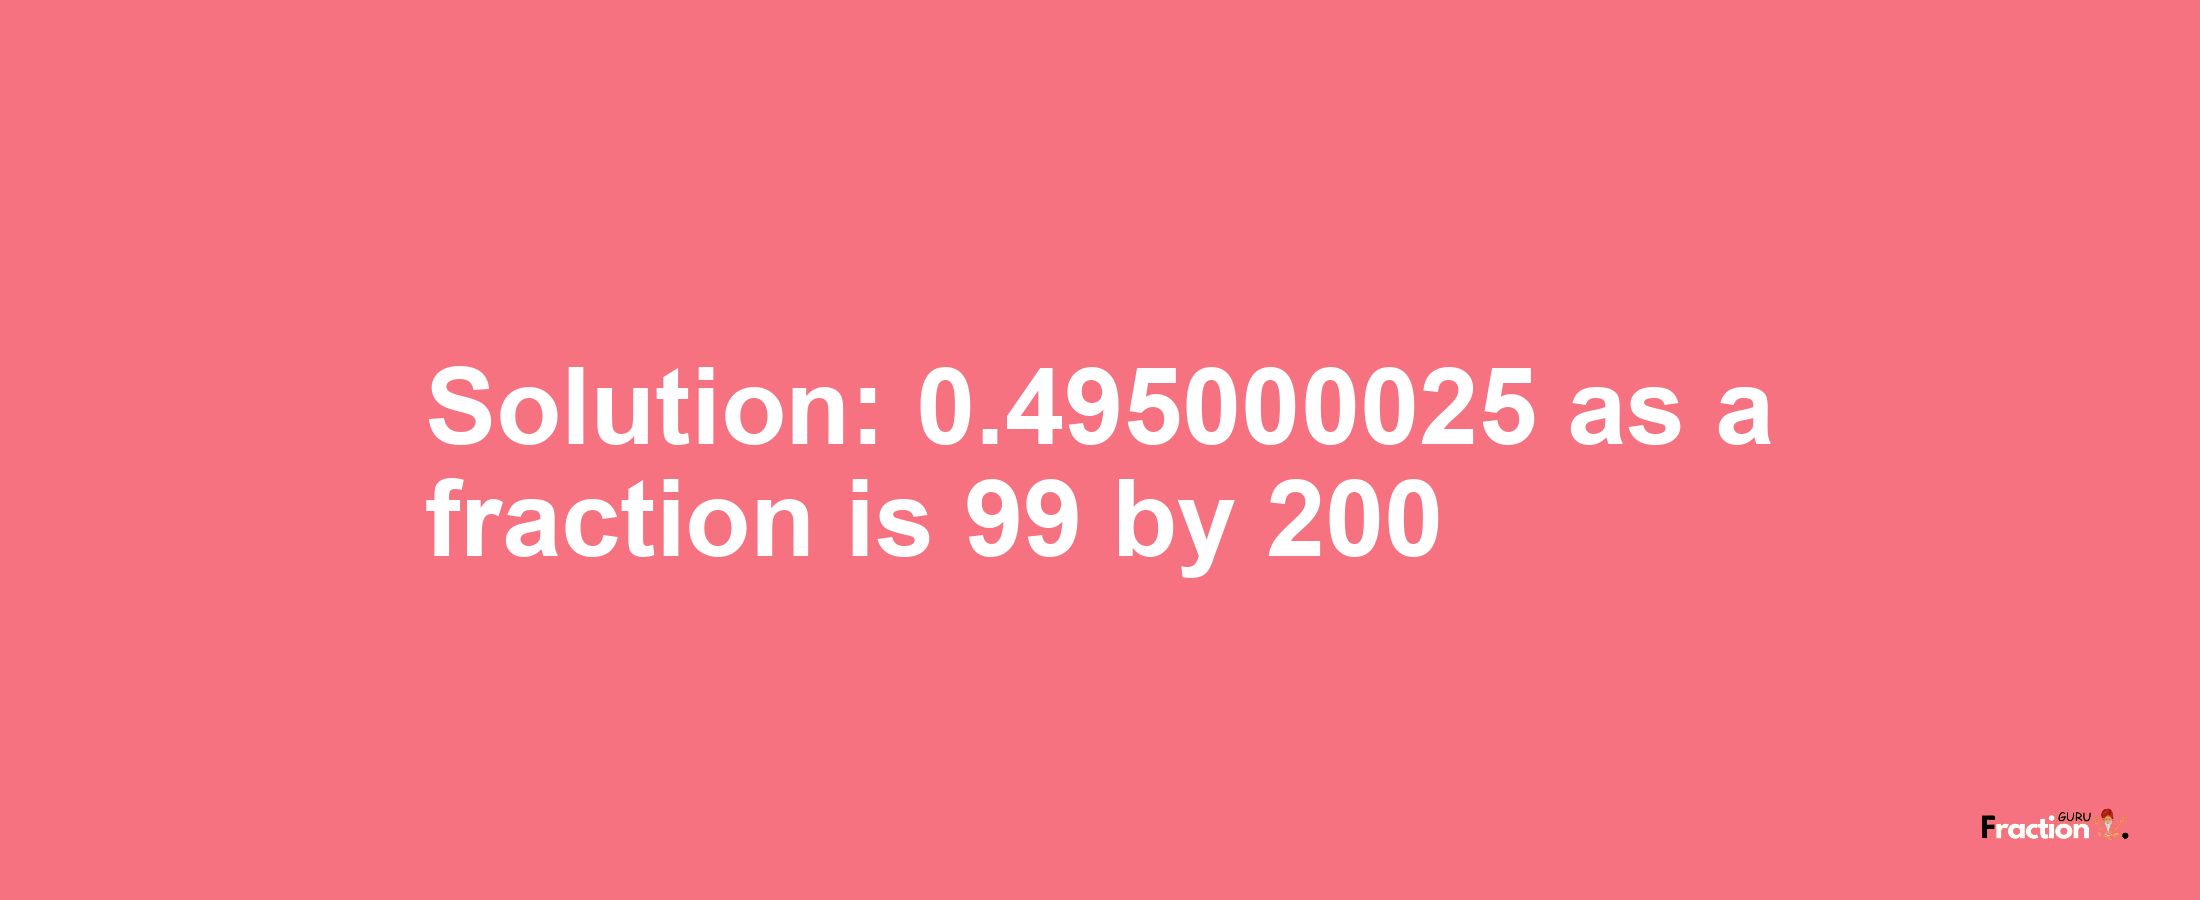 Solution:0.495000025 as a fraction is 99/200